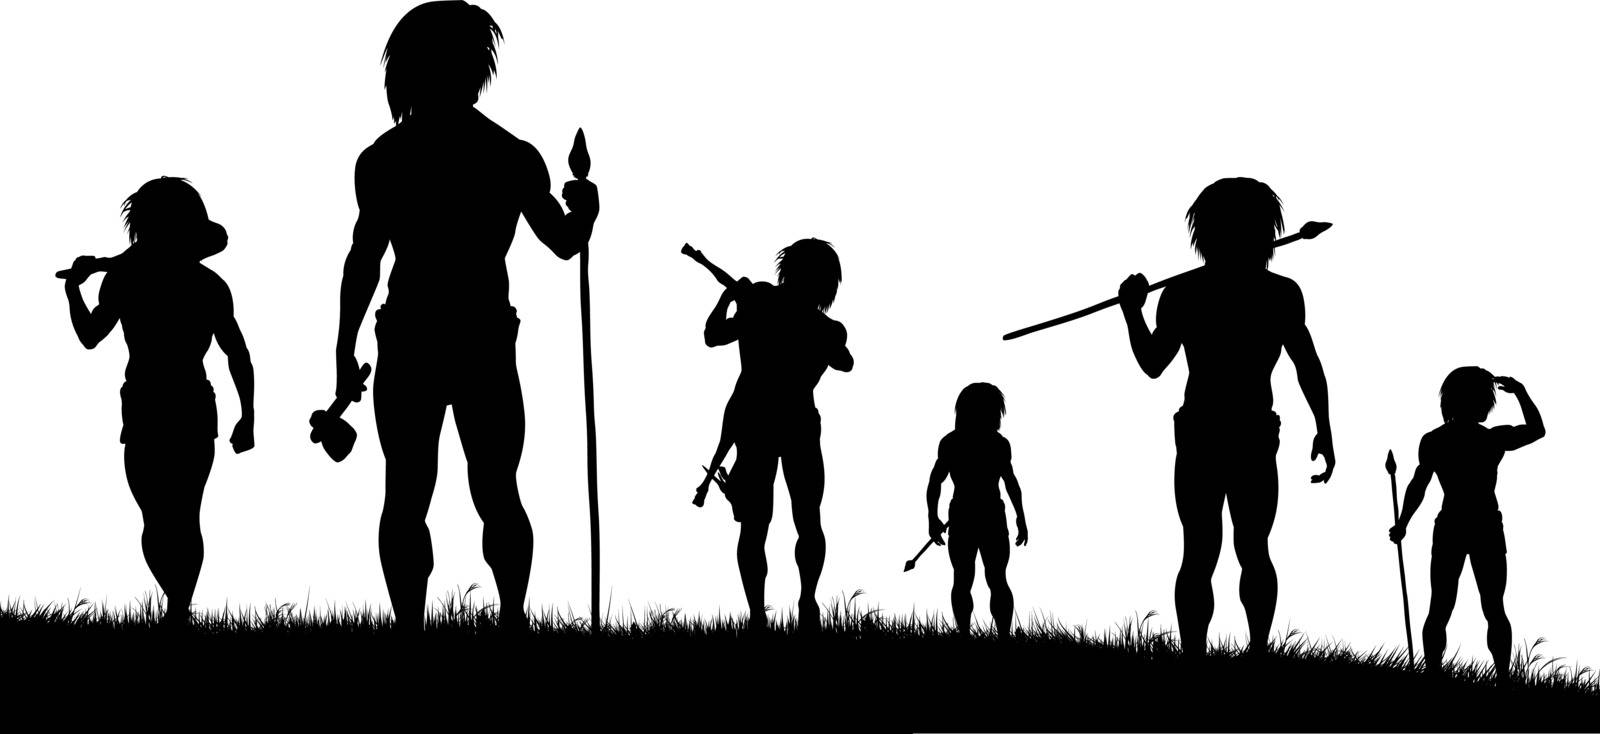 Editable vector silhouettes of cavemen hunters with each figure as a separate object